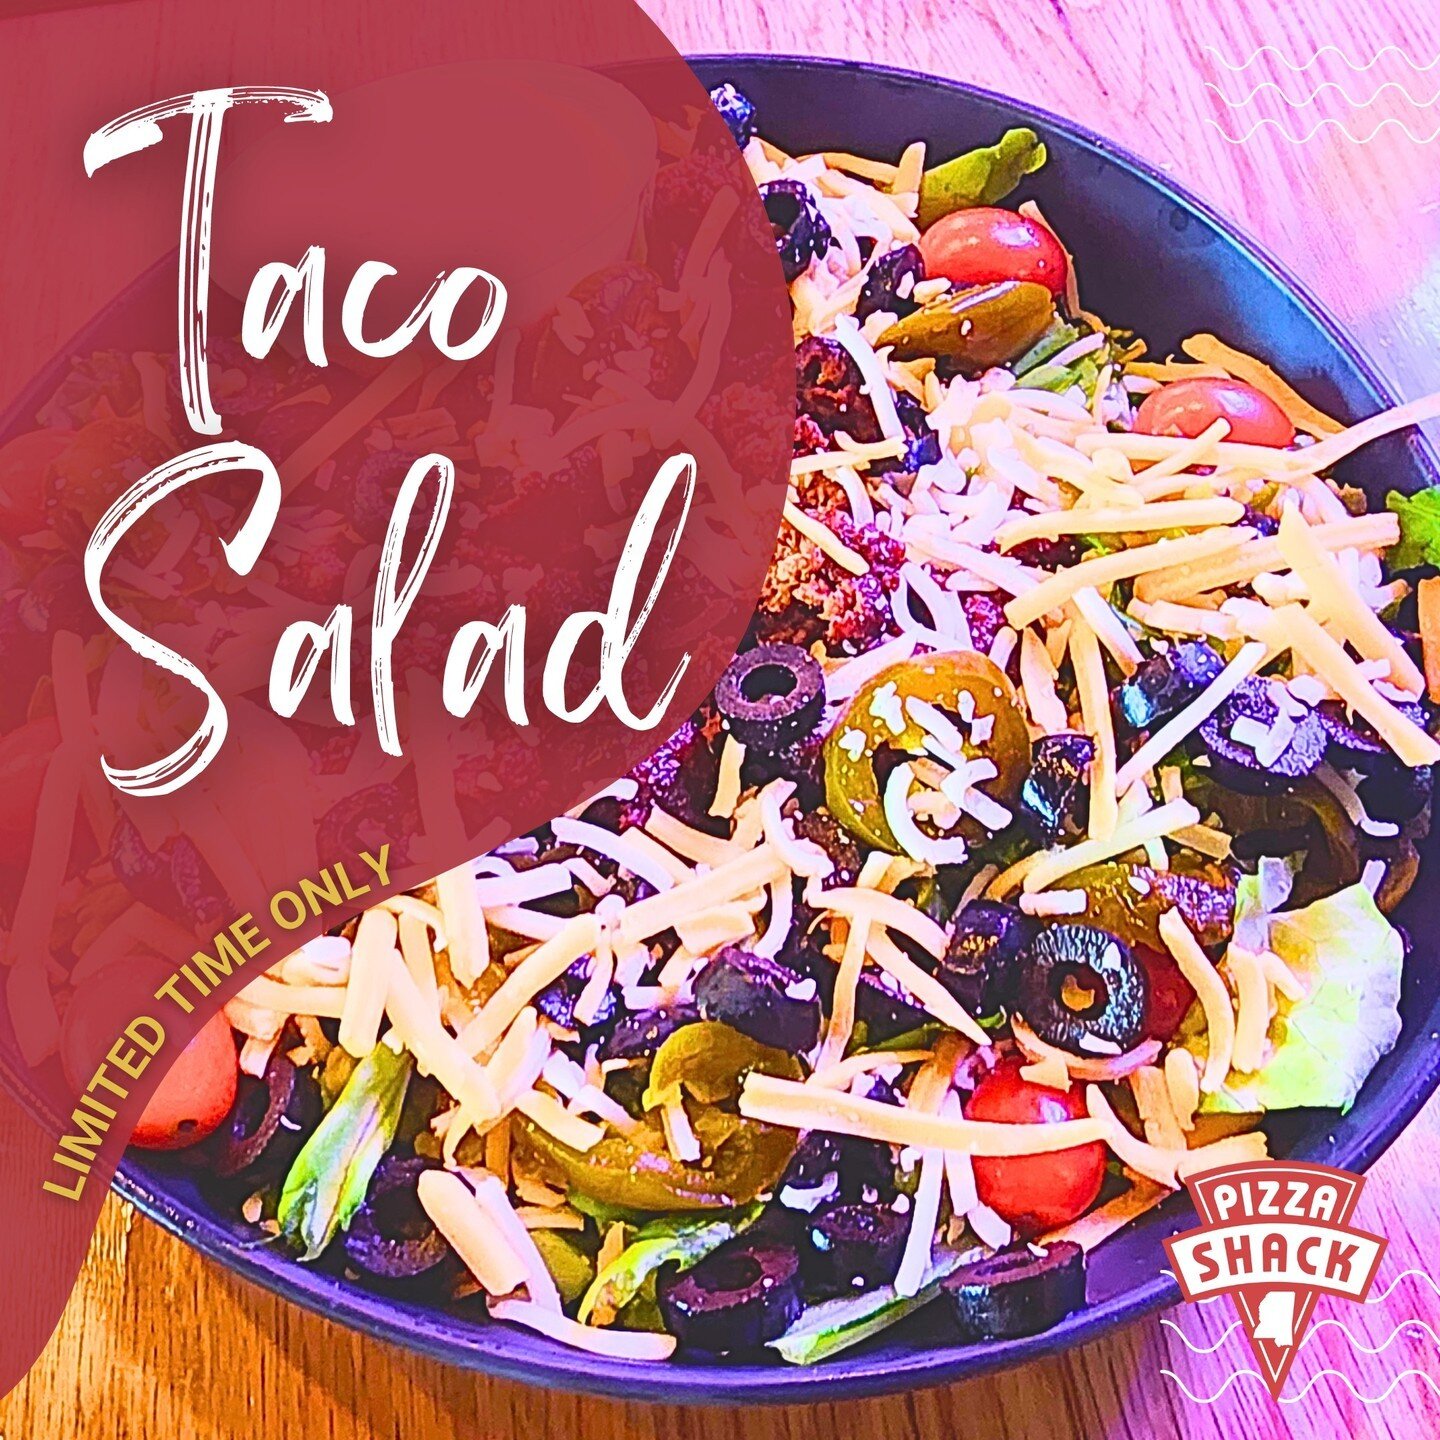 Looking for a salad that packs a punch? Try our new Taco Salad, loaded with bold flavors and crispy crunch. This limited-time offer features seasoned beef, zesty jalapenos, and crunchy Doritos, all topped with creamy southwestern ranch dressing. It's